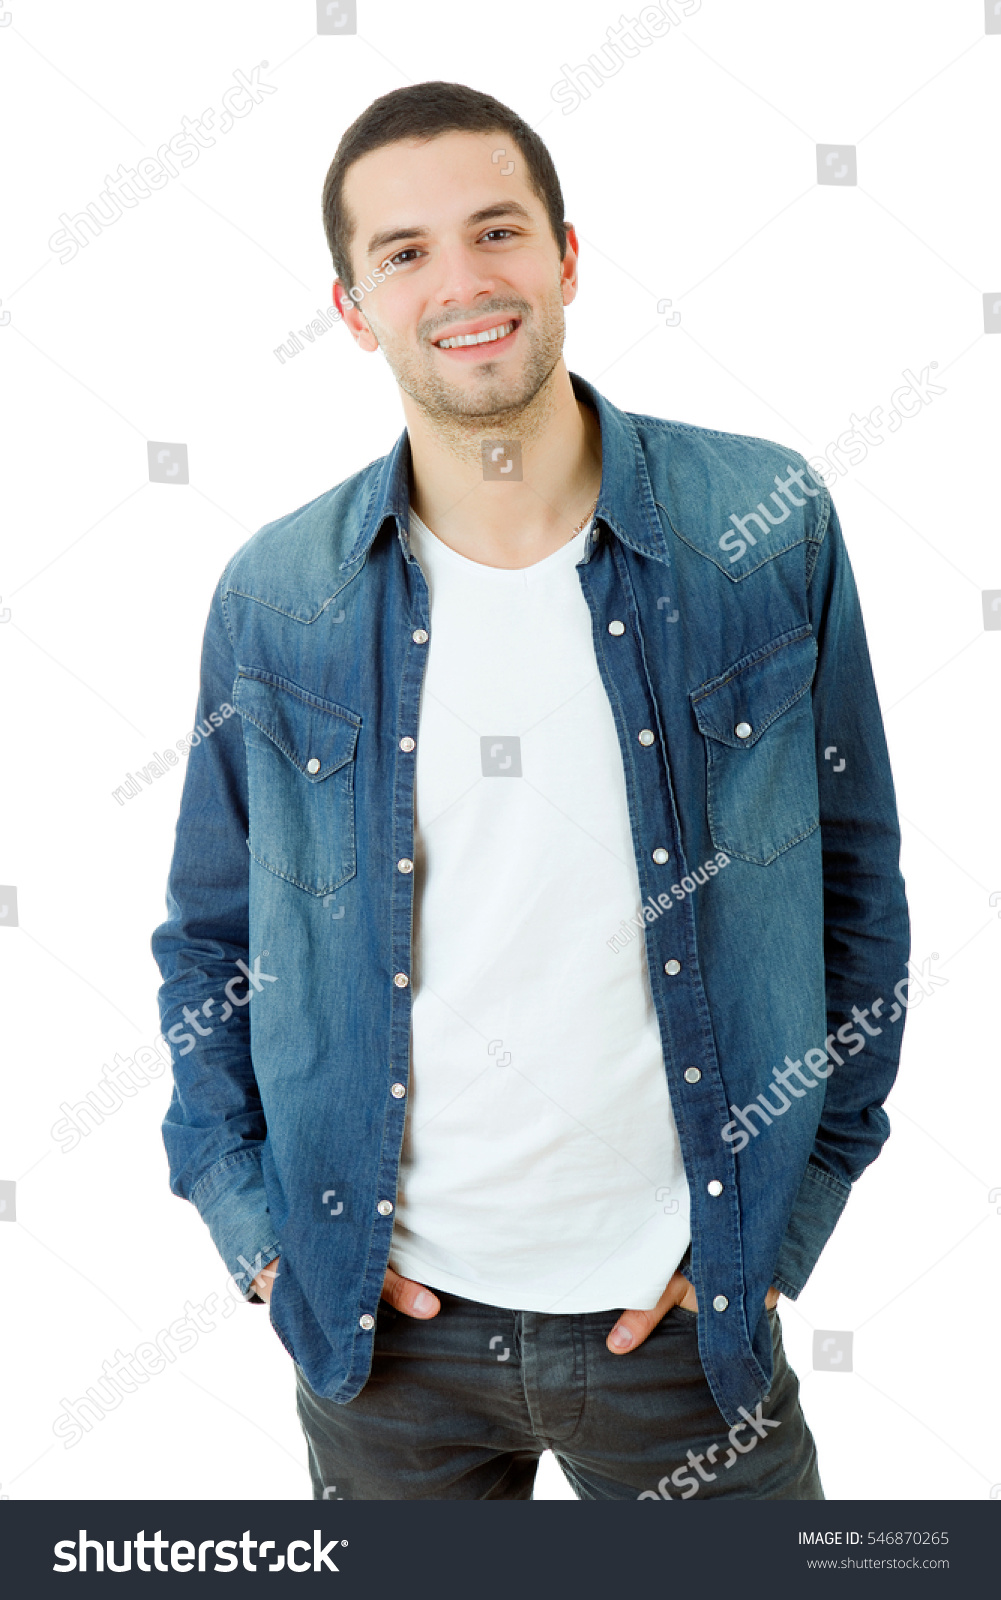 young happy casual man portrait, isolated on white #546870265